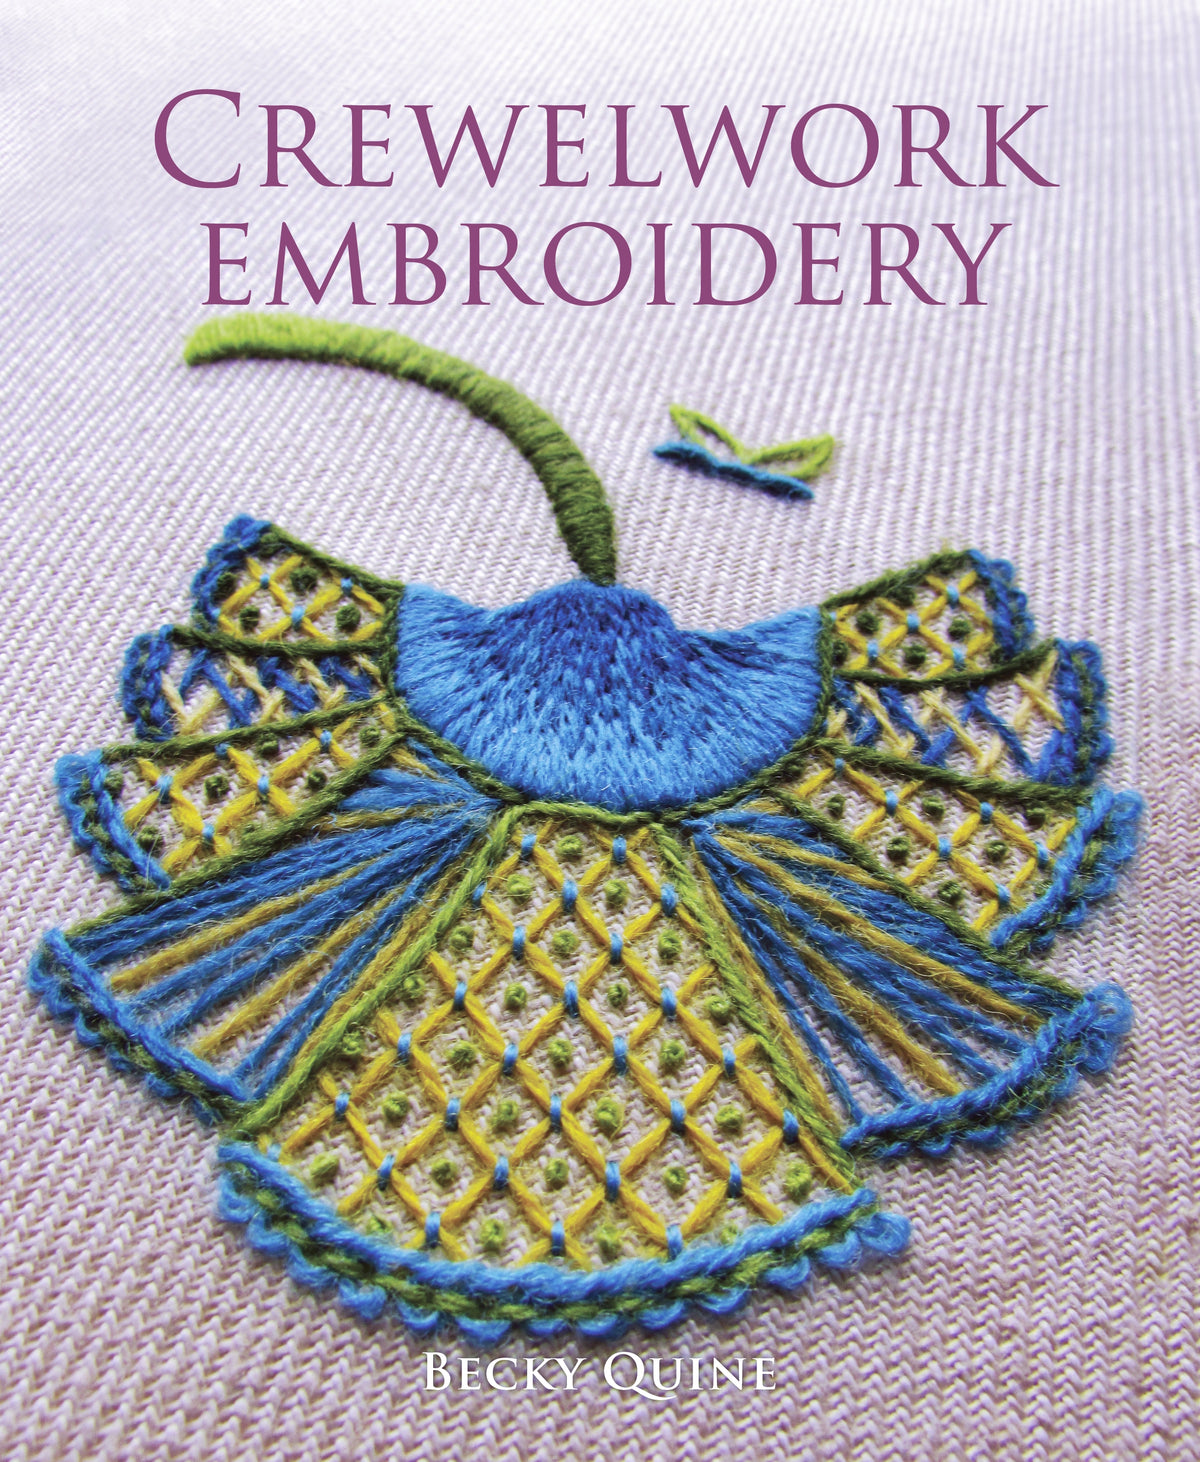 Crewelwork Embroidery